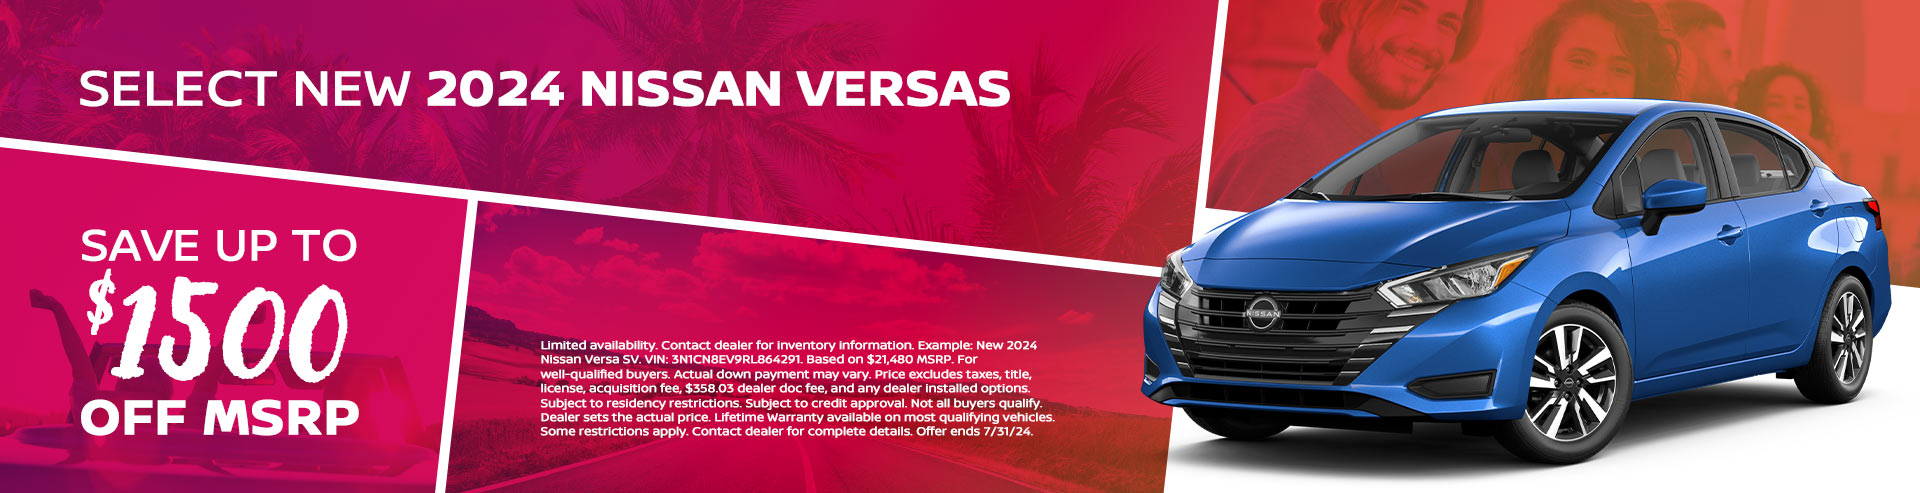 Save up to $1,500 off MSRP on select New 2024 Nissan Versas